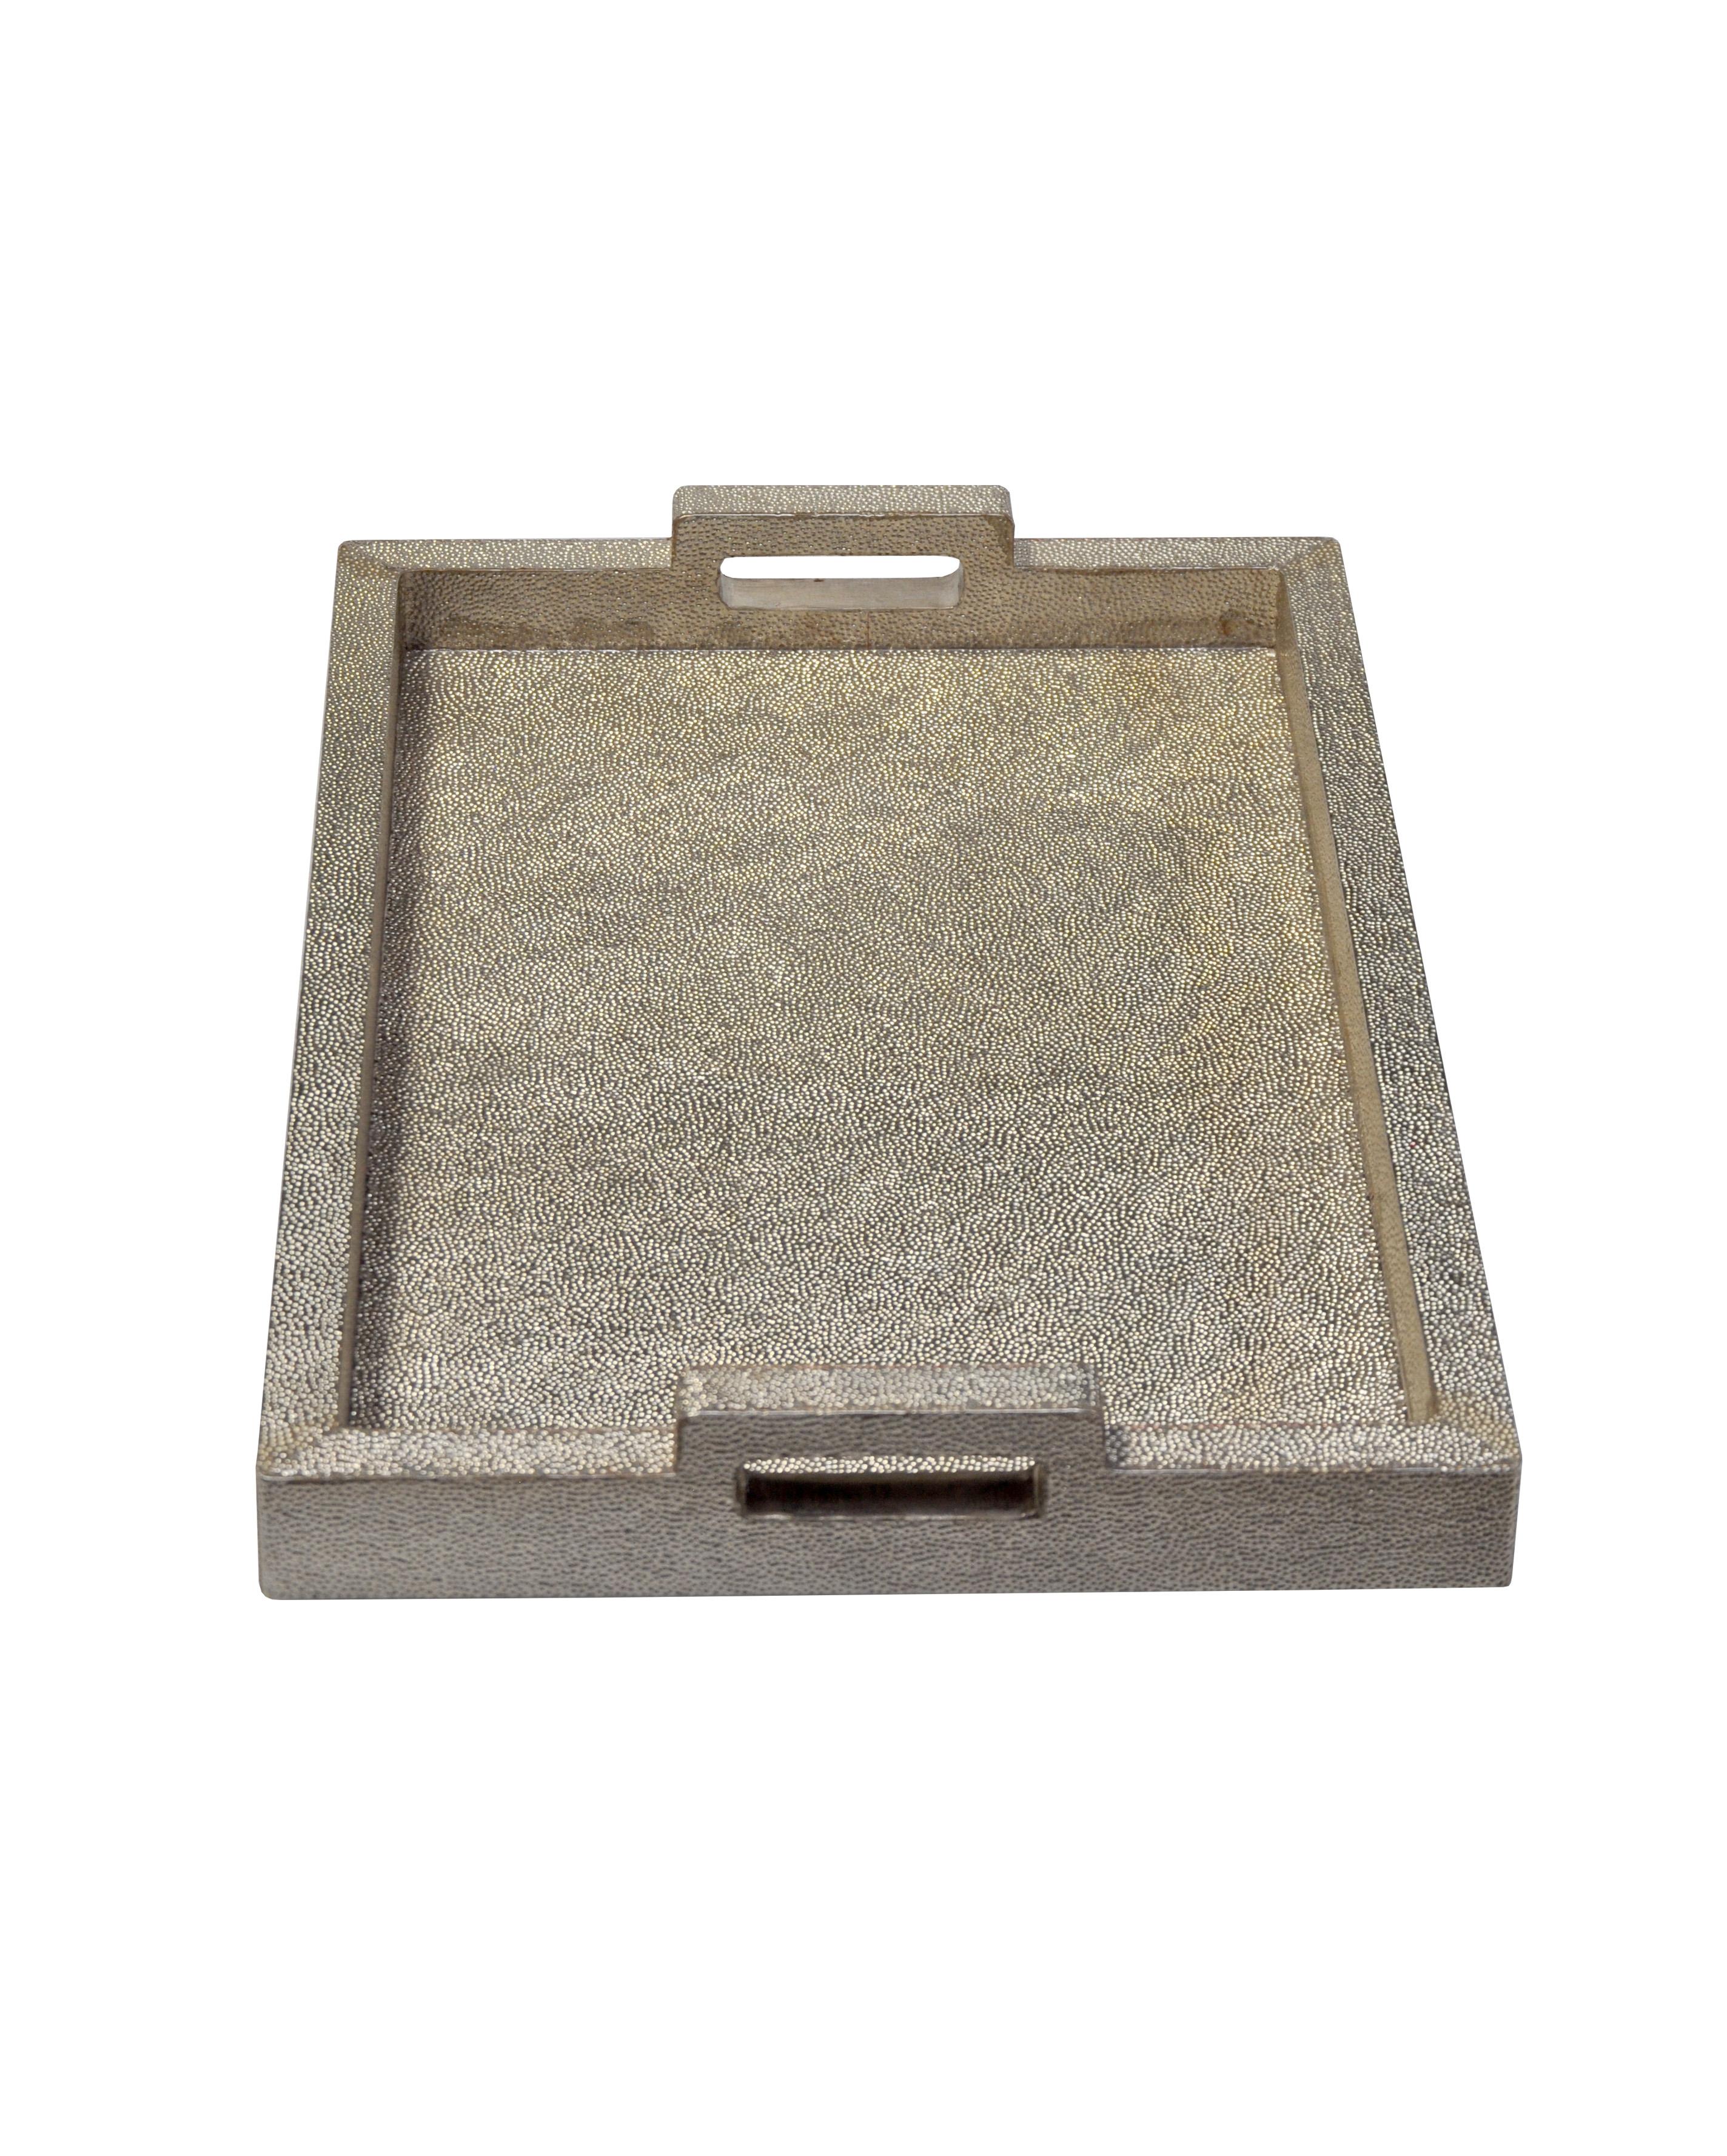 Rectangular Metal Tray in White Bronze Clad Over MDF by Stephanie Odegard For Sale 1